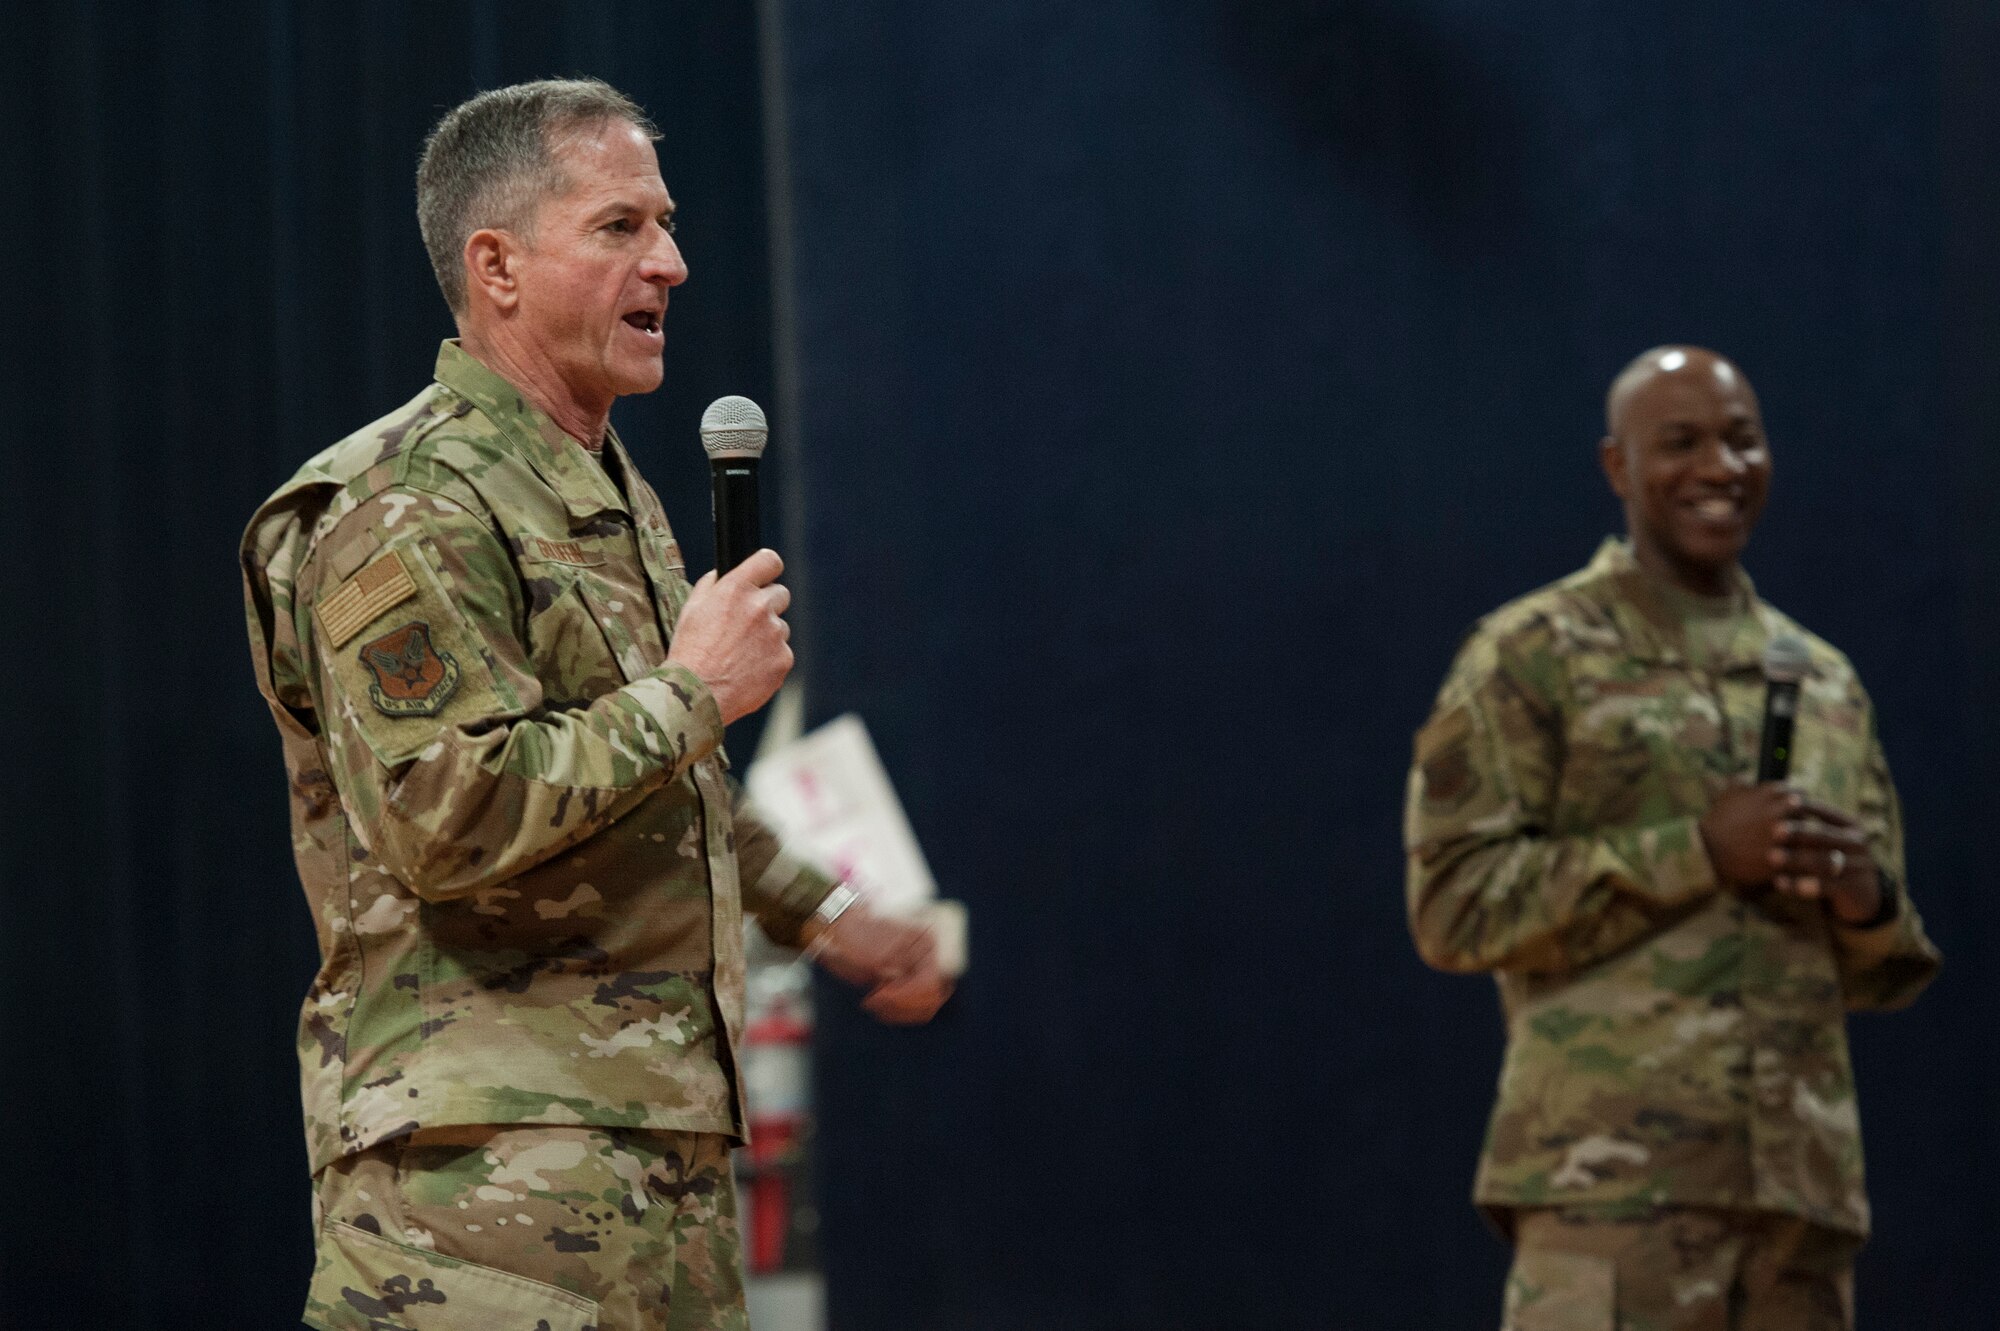 U.S. Air Force Chief of Staff Gen. David L. Goldfein and Chief Master Sgt. of the Air Force Kaleth O. Wright answer questions from Airmen during a base-wide “all call” at Al Udeid Air Base, Qatar, Dec. 19, 2018. During the all call, Goldfein said his leadership team has been pushing decision authority and resources down to the squadron level while simultaneously removing irritants and obstacles to warfighting readiness. (U.S. Air Force photo by Tech. Sgt. Christopher Hubenthal)